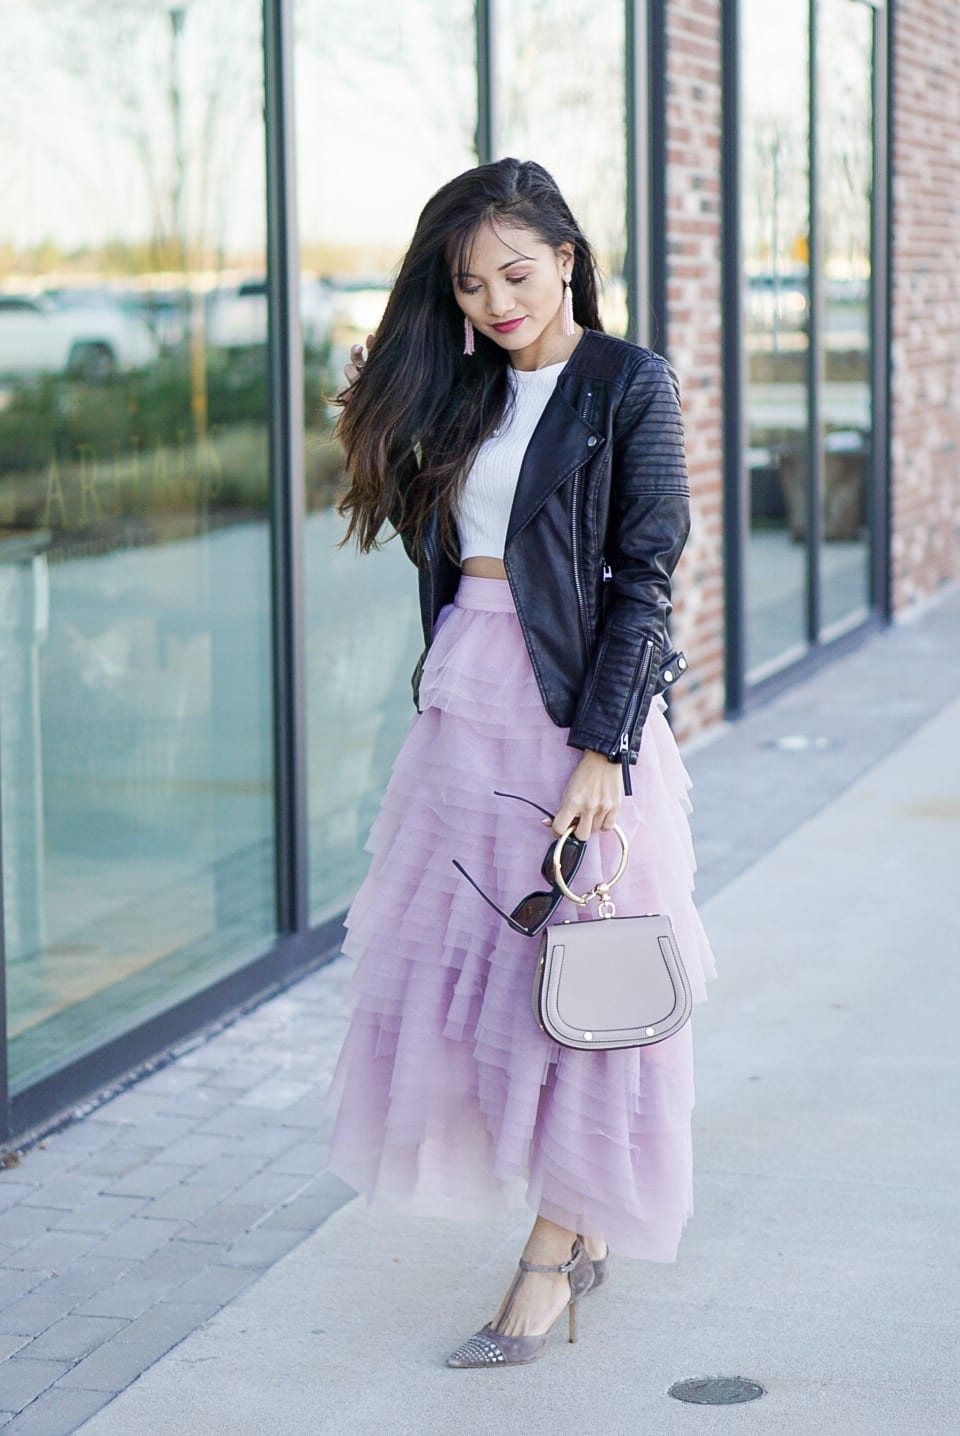 Black Tulle Skirt Holiday Look - Gift Guide for Her - Dawn P. Darnell